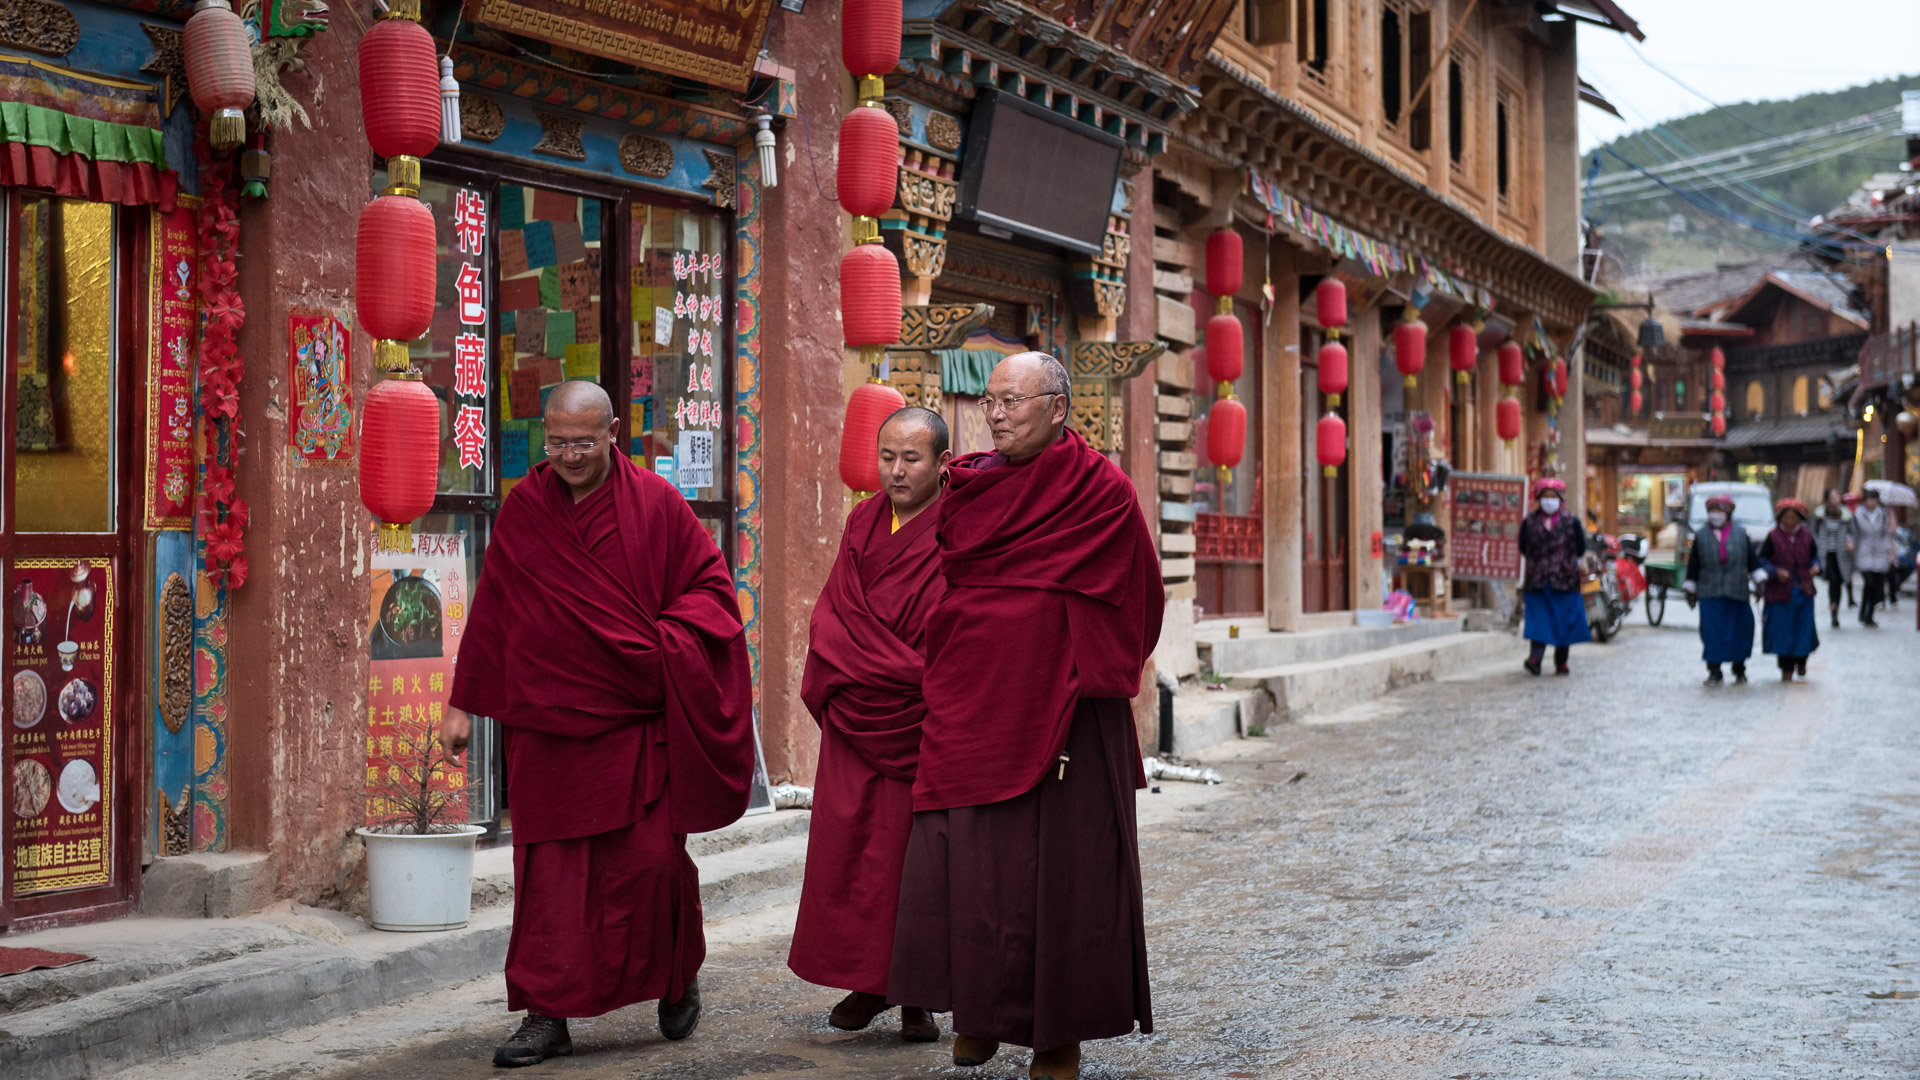 Tibetan monks stroll through the streets of old town in Shangri-La.